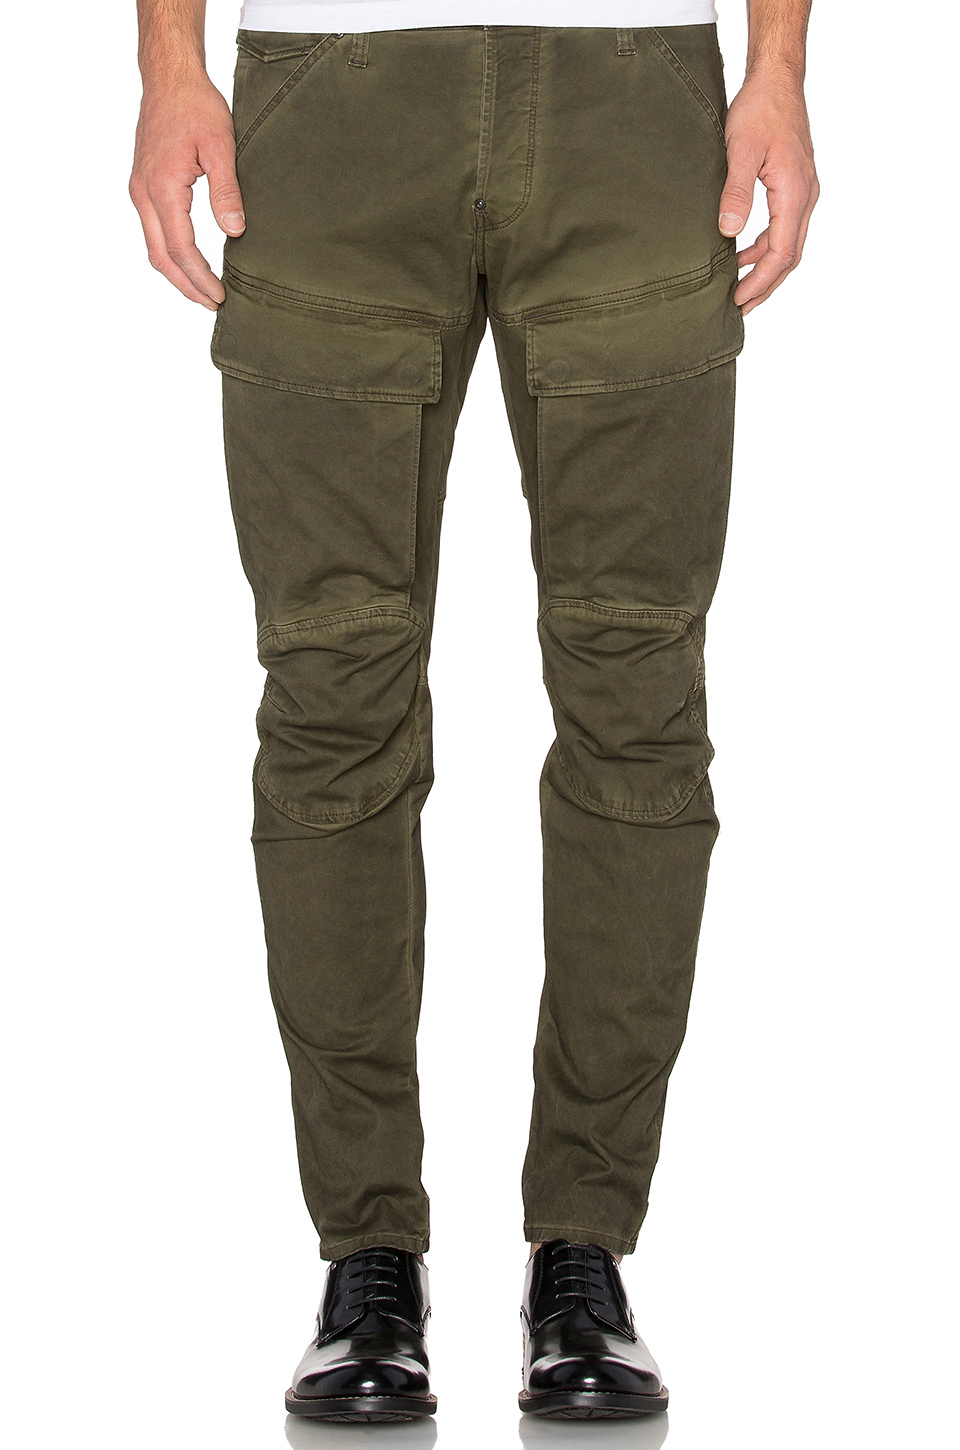 Lyst - G-Star Raw Air Defence 5620 3d Slim in Green for Men